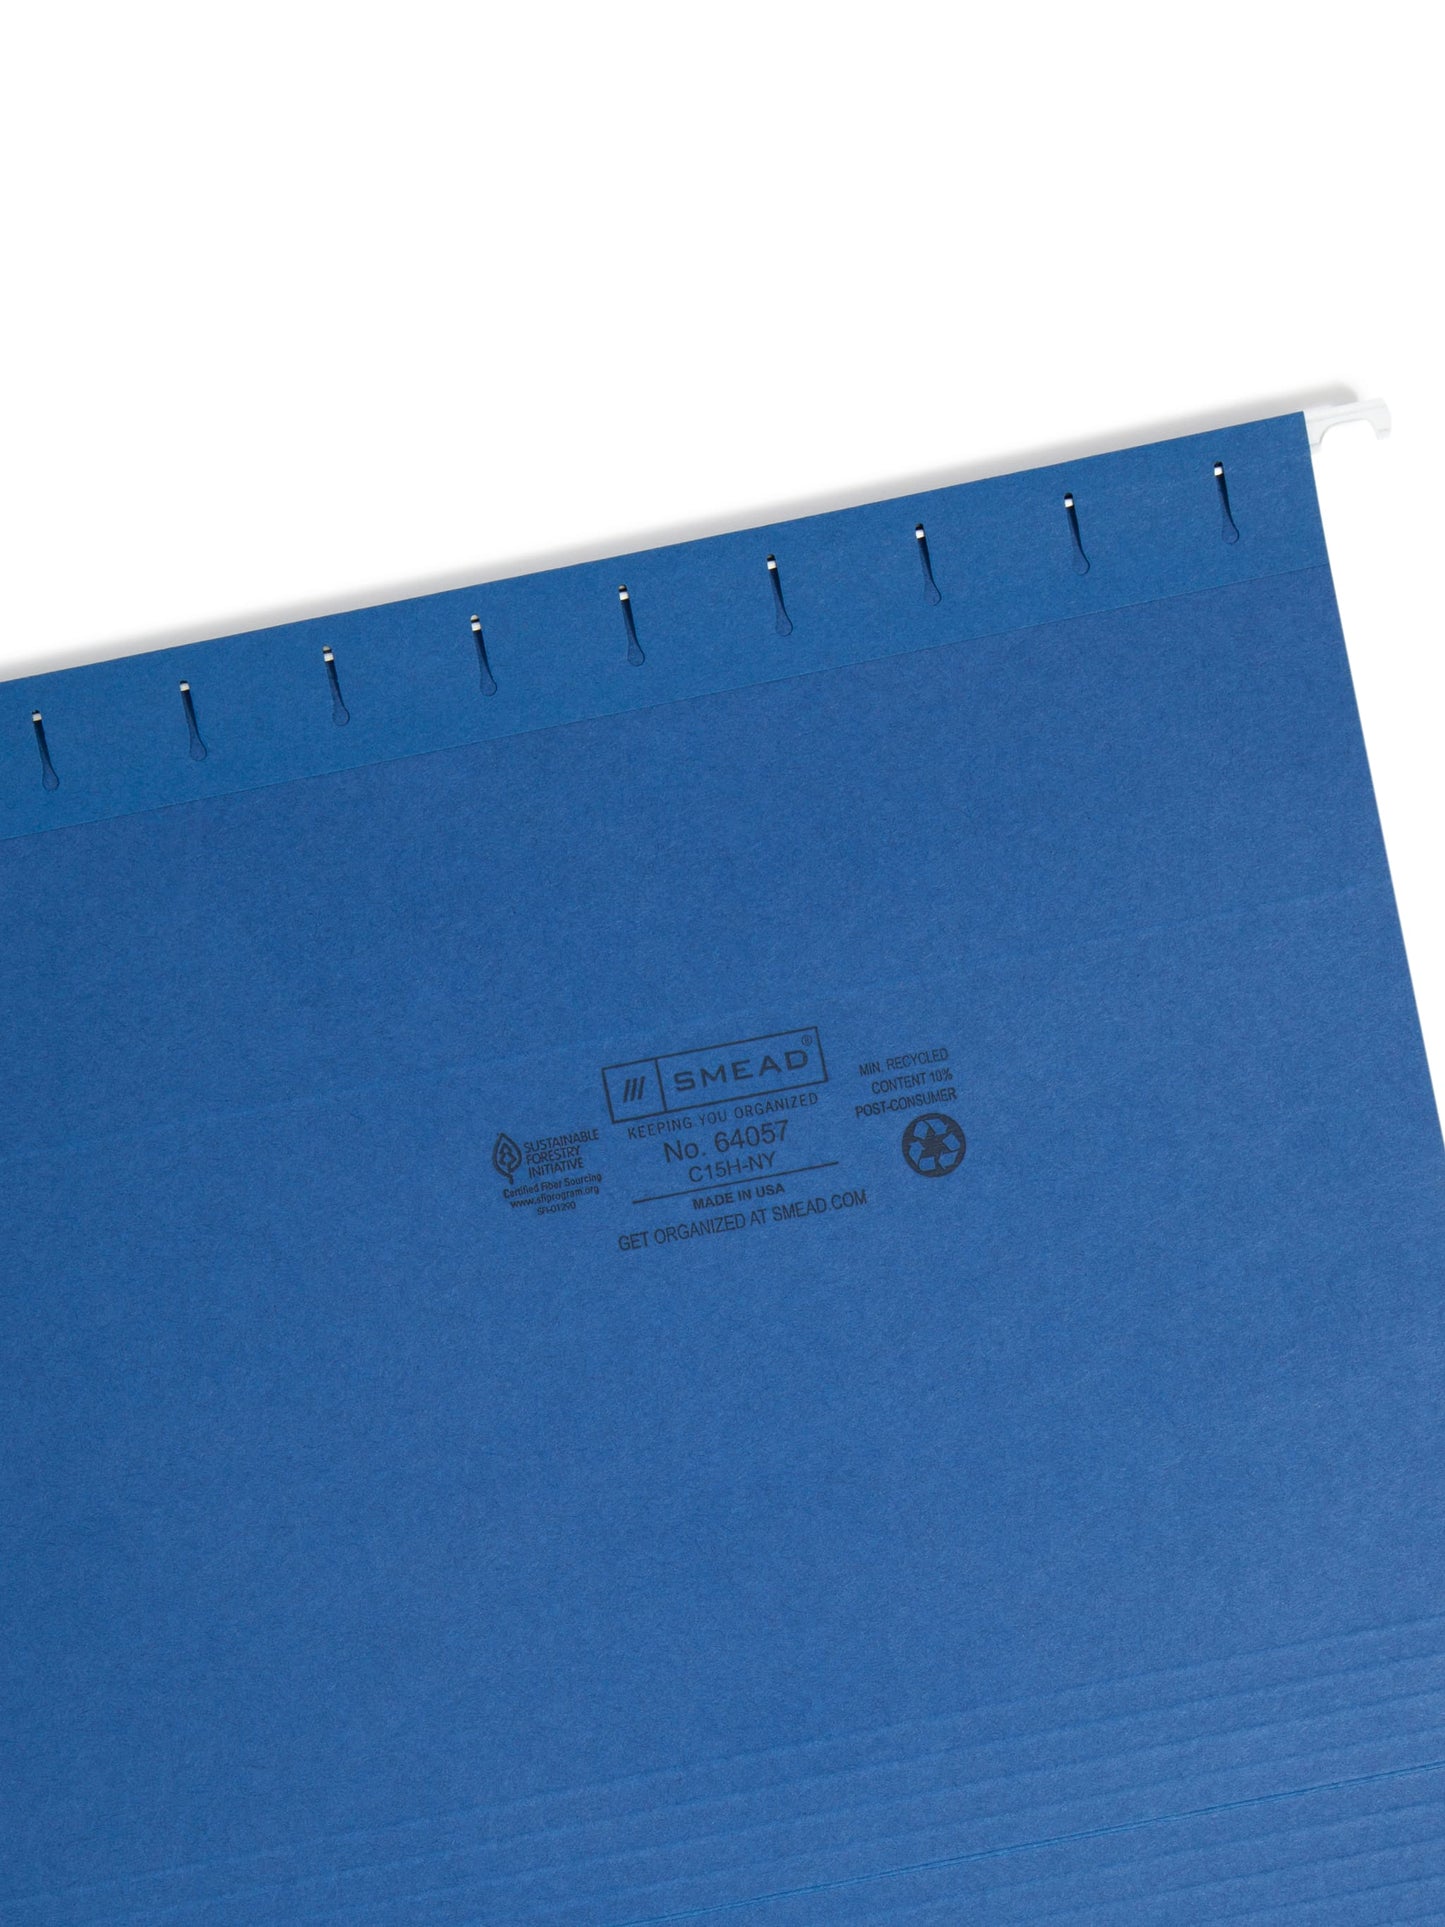 Standard Hanging File Folders with 1/5-Cut Tabs, Navy Color, Letter Size, Set of 25, 086486640572